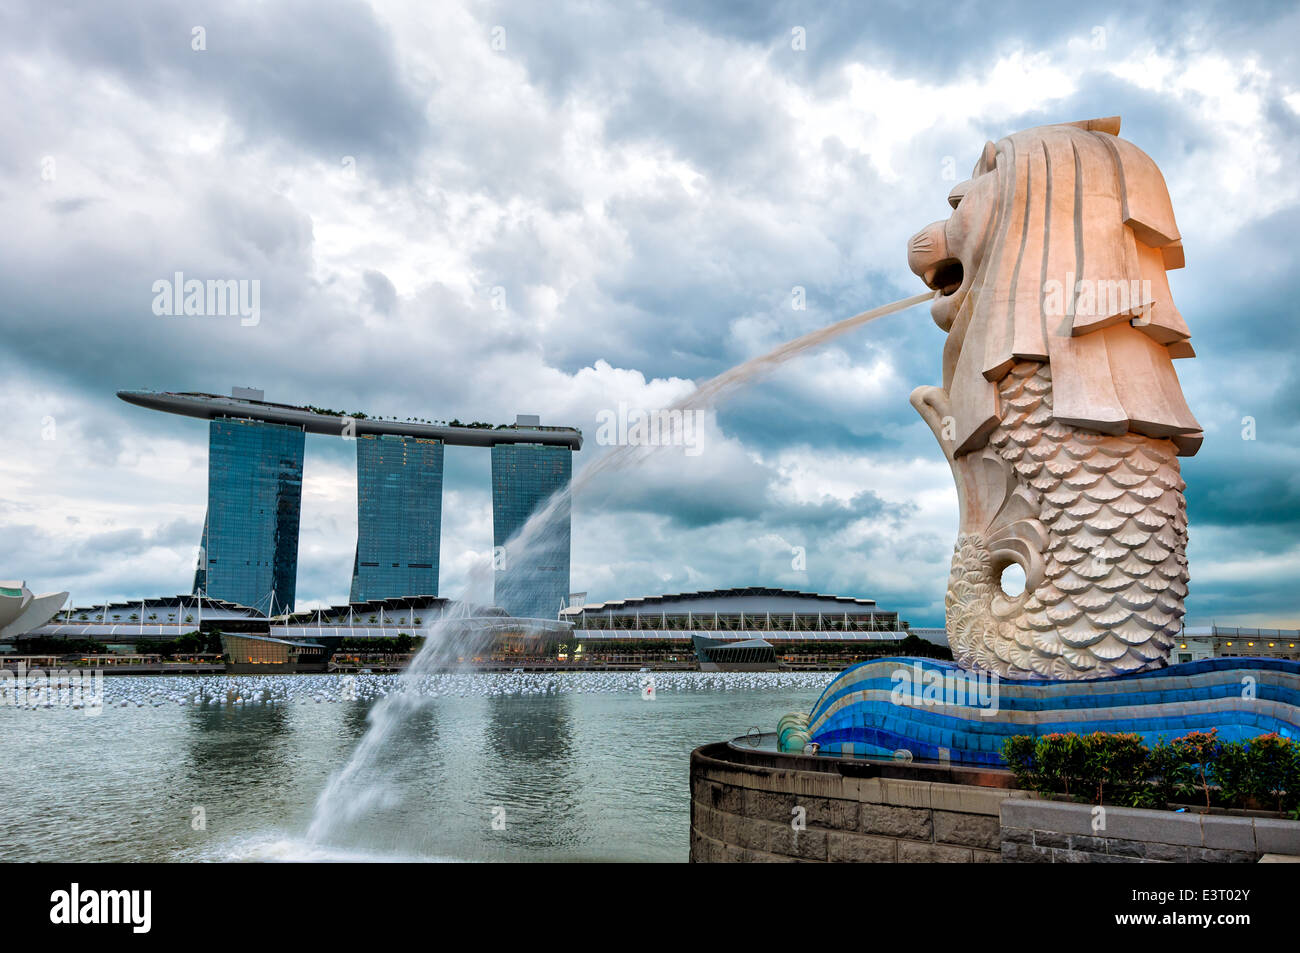 The Merlion fountain and Marina Bay Sands Hotel in Singapore in the early evening. Stock Photo